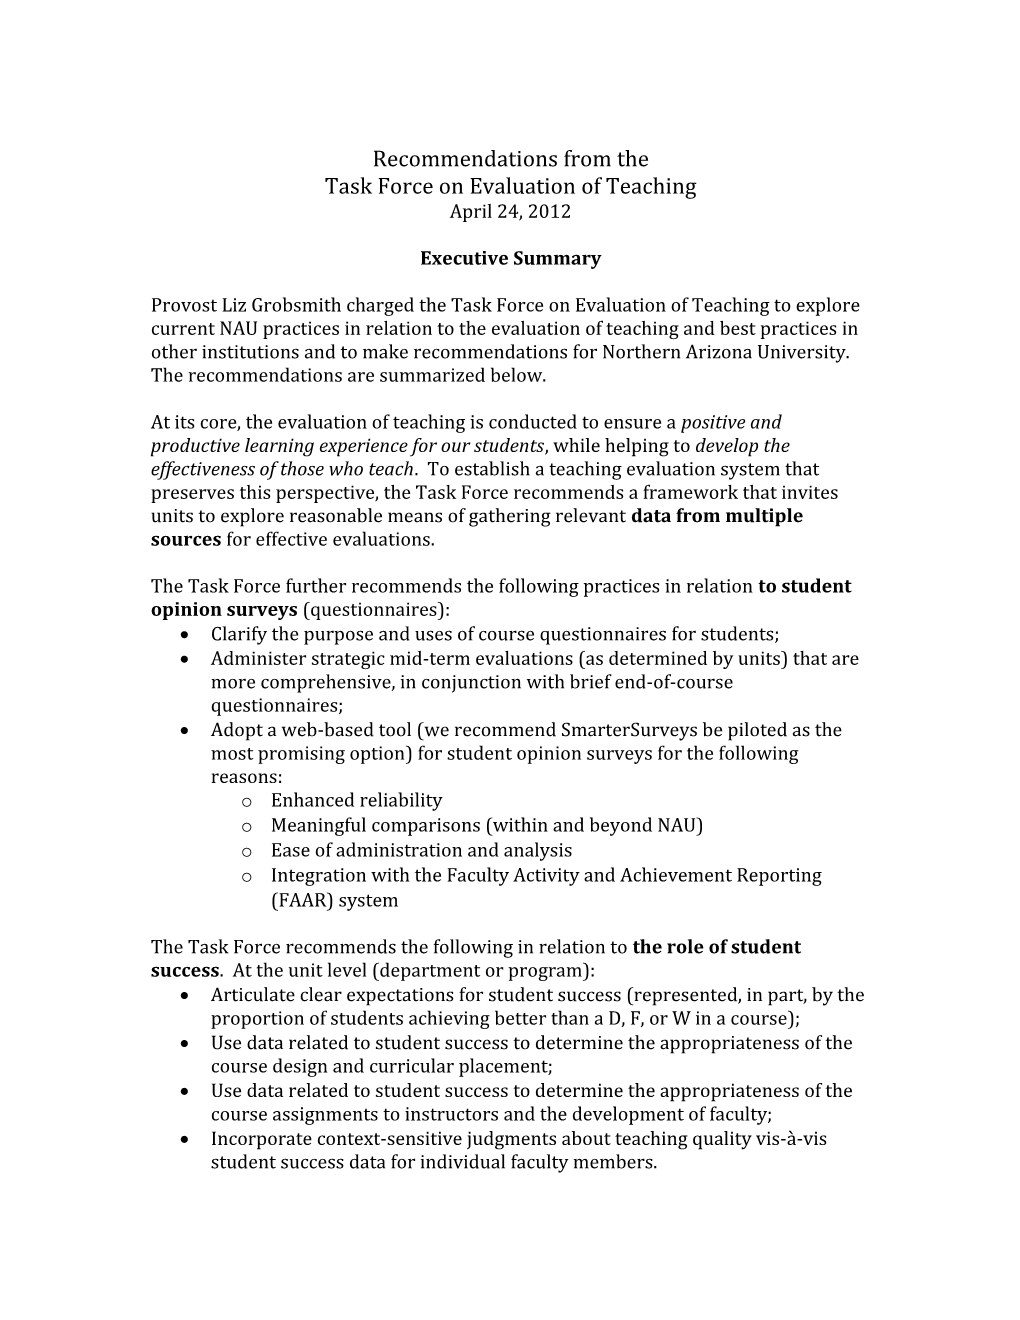 Task Force on Evaluation of Teaching